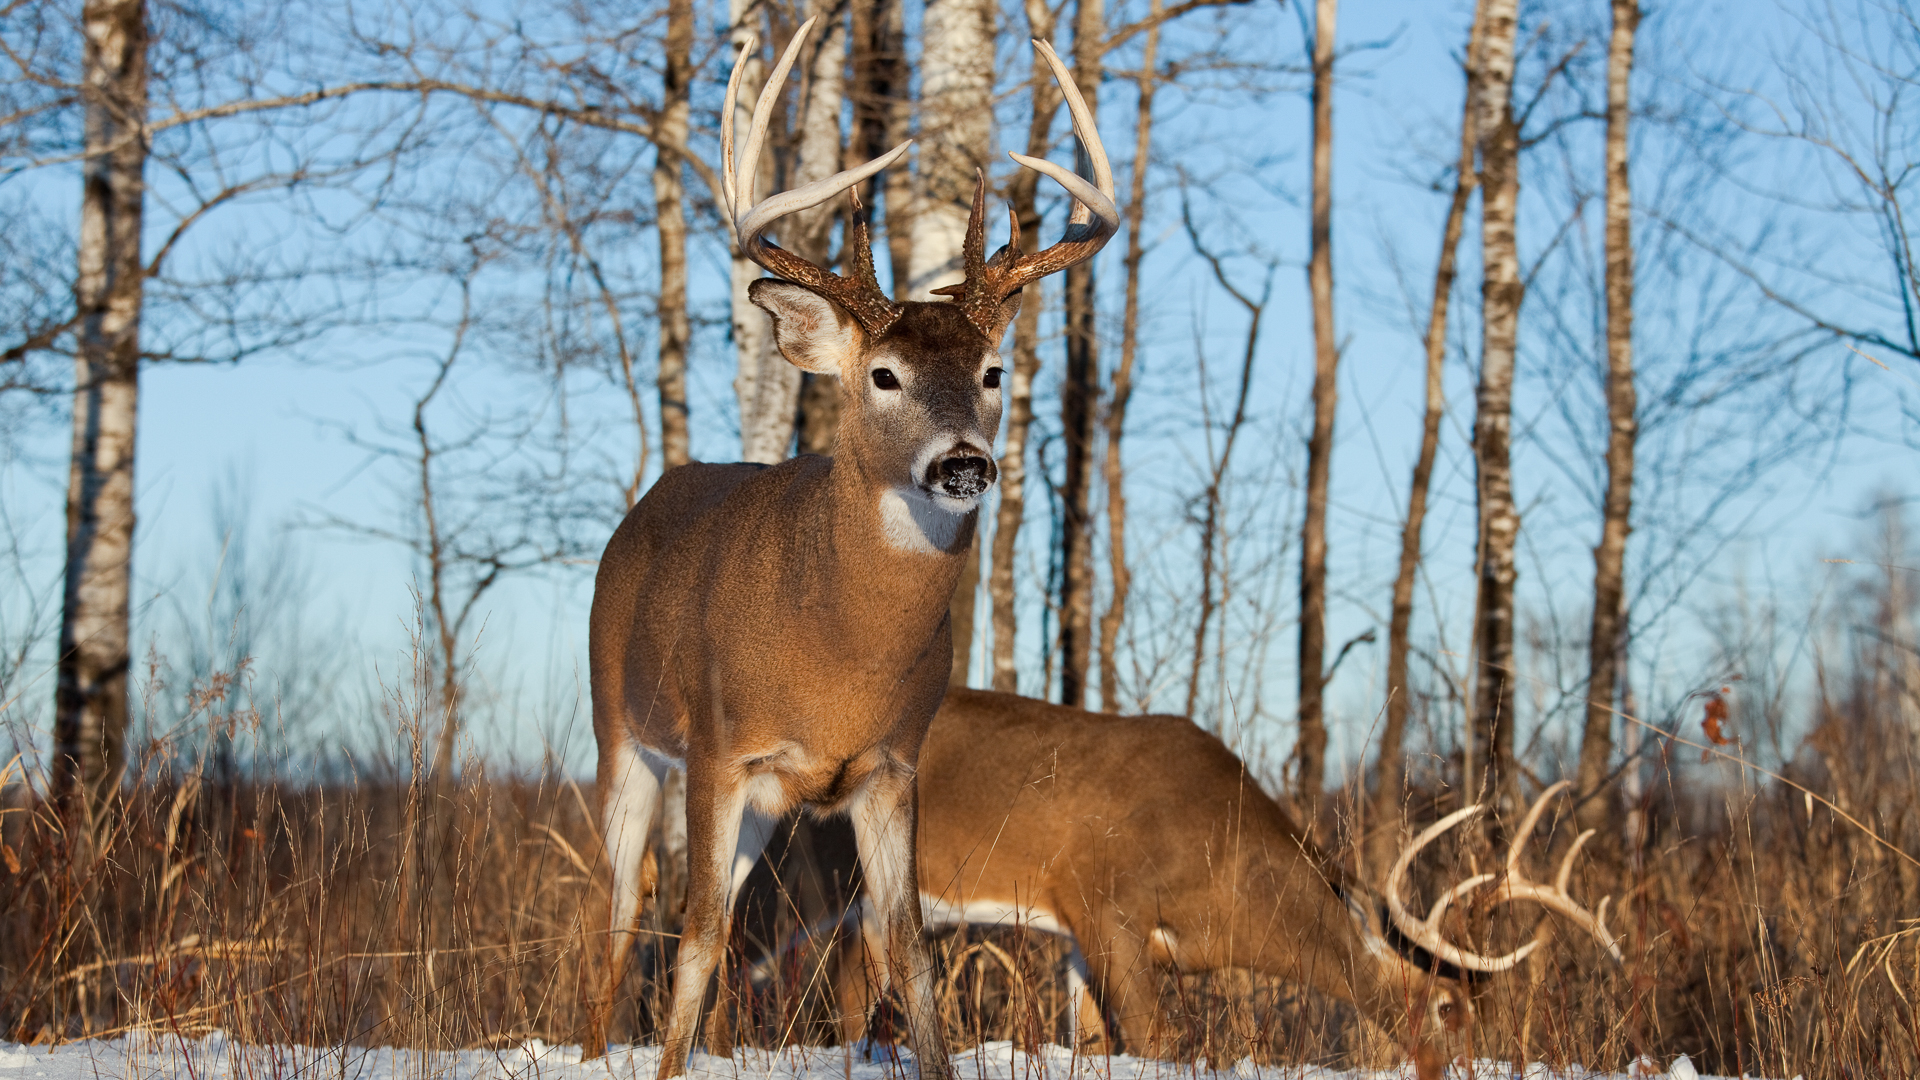 What Are Deer Eating In The Late Season?